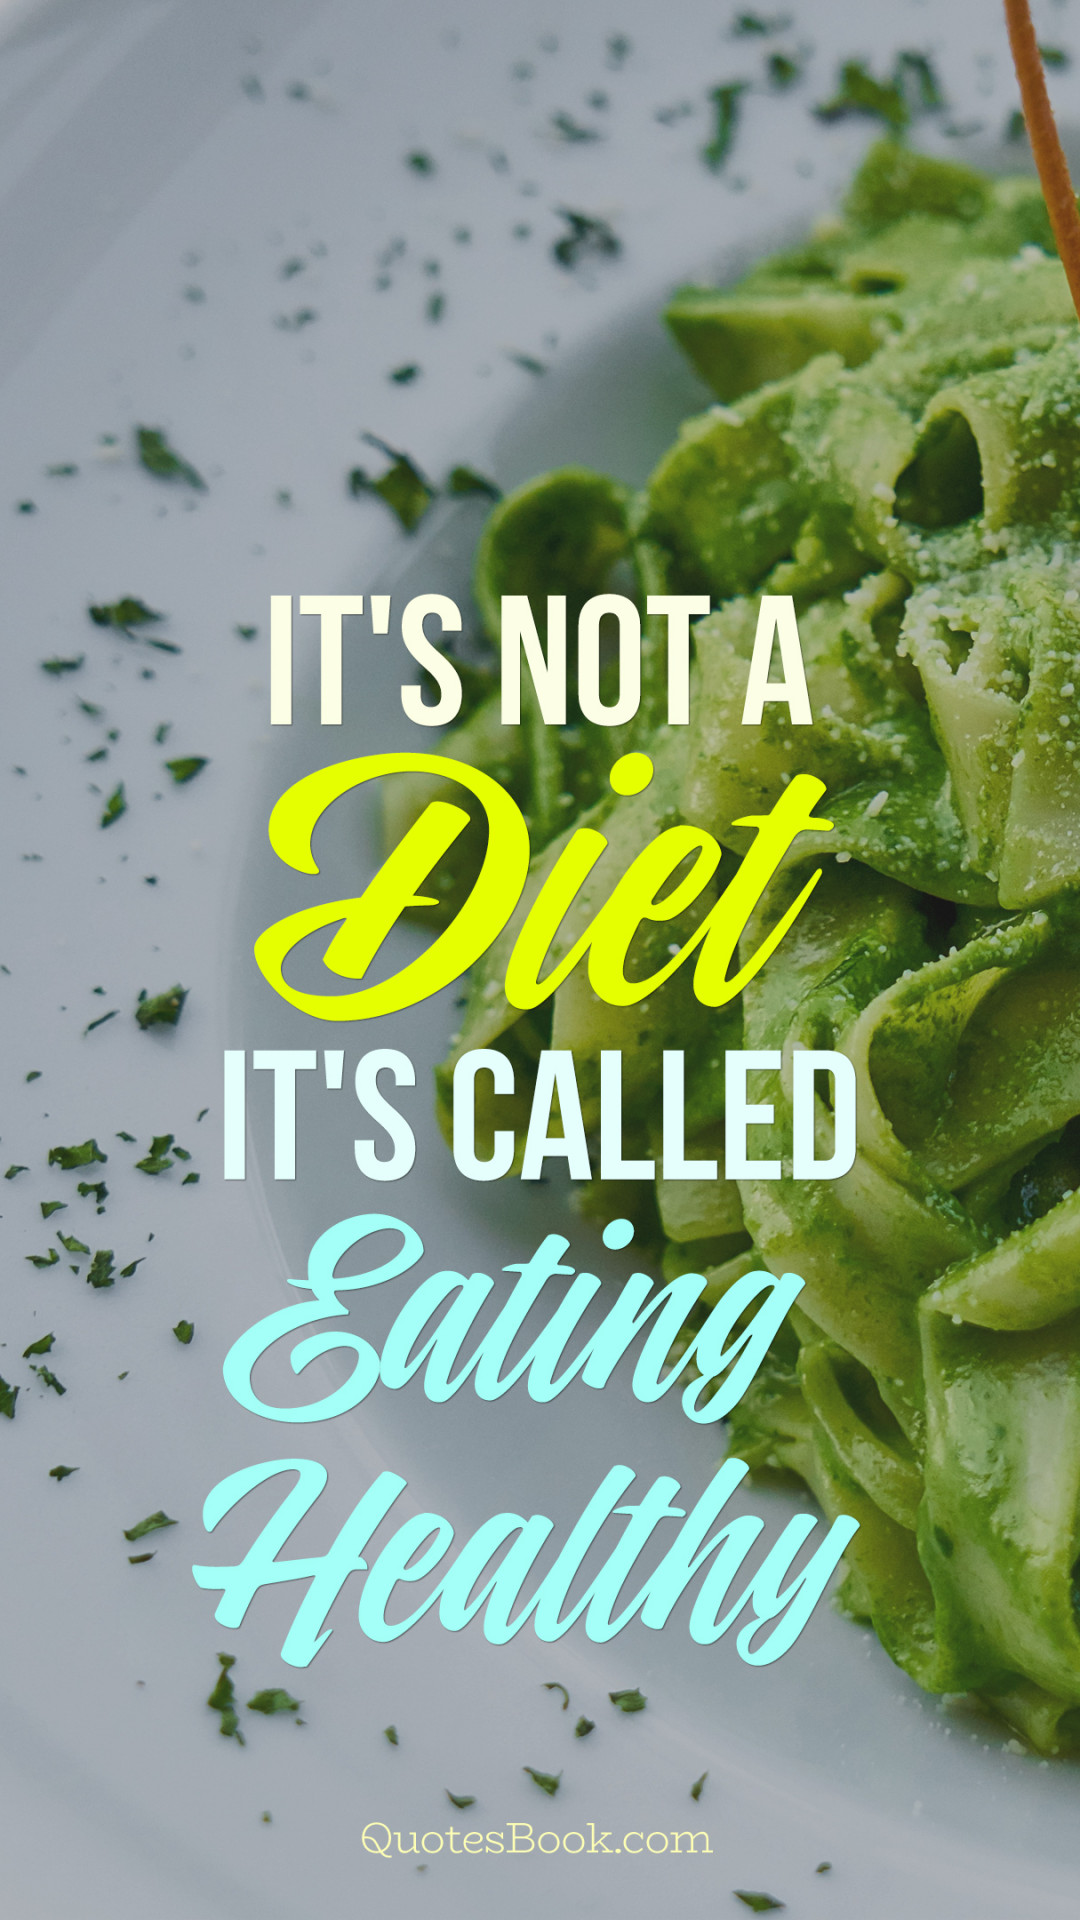 It s not a diet it s called eating healthy - QuotesBook